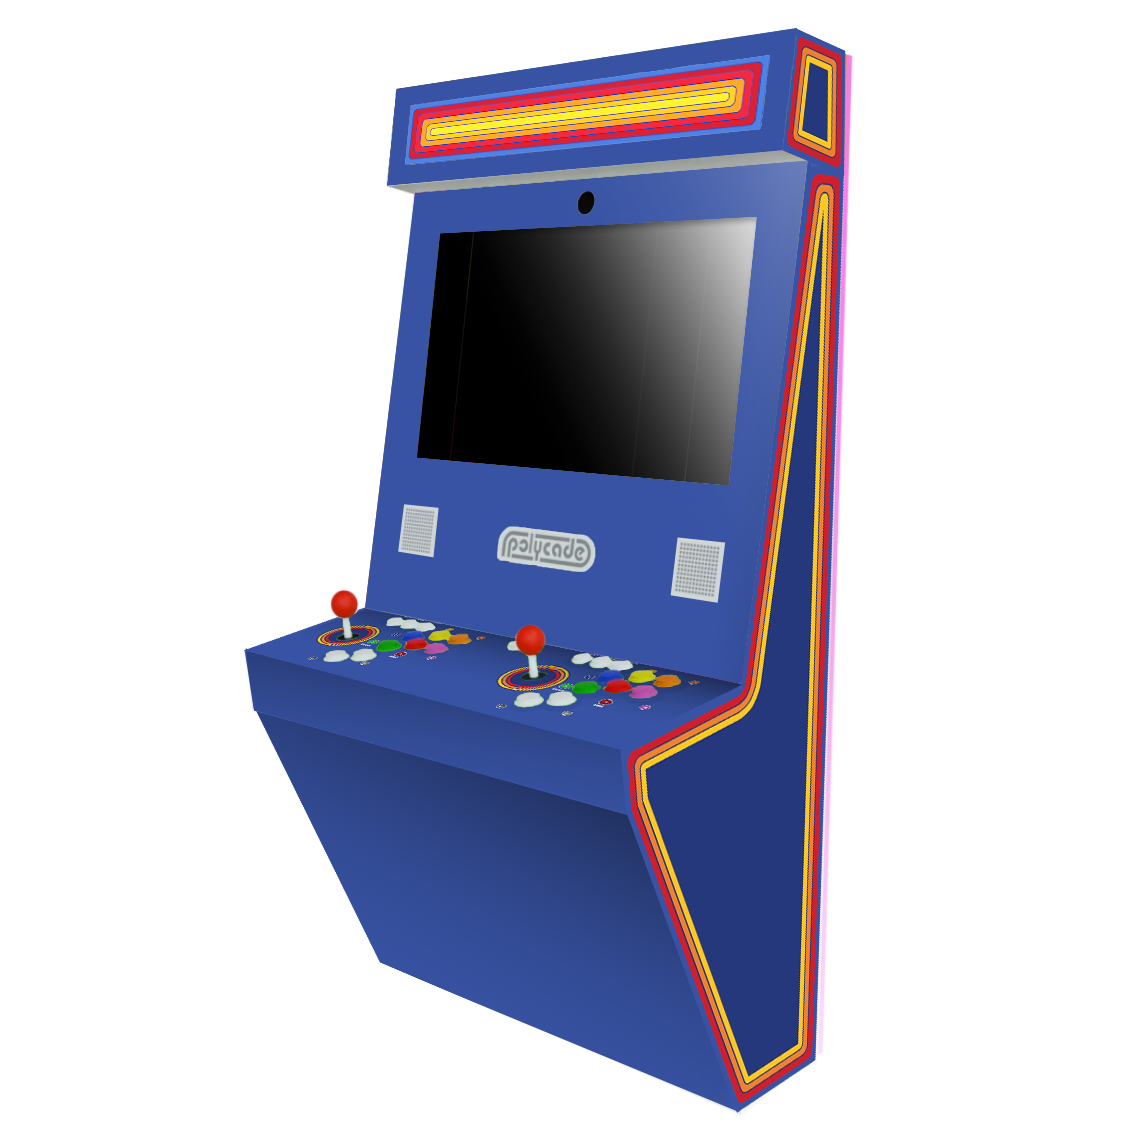 Magnetic Decal - Polycade Classic